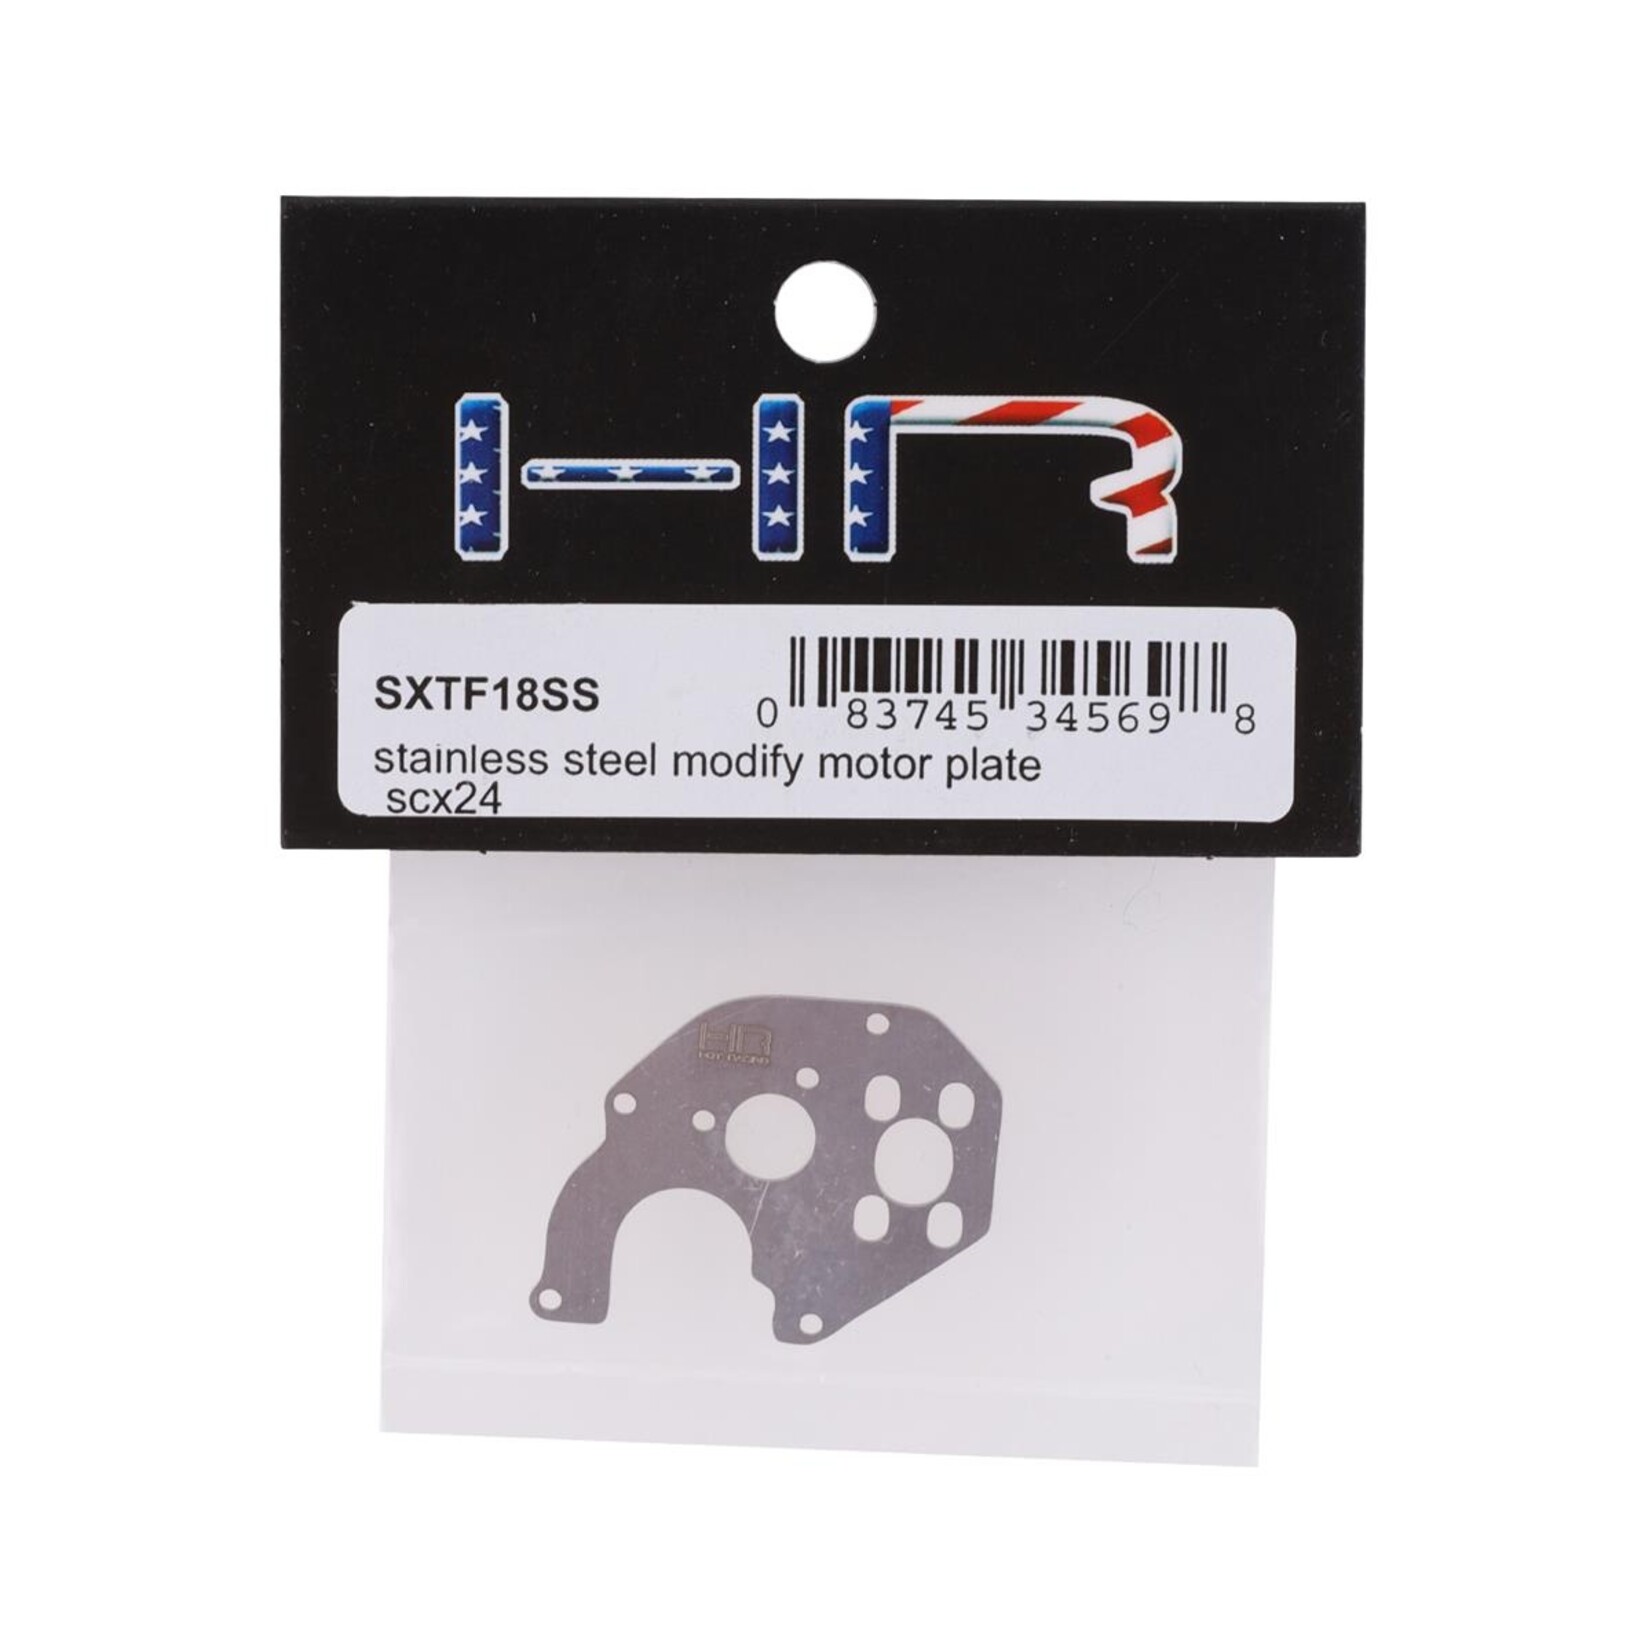 Hot Racing Hot Racing Axial SCX24 Stainless Steel Modify Motor Plate #SXTF18SS